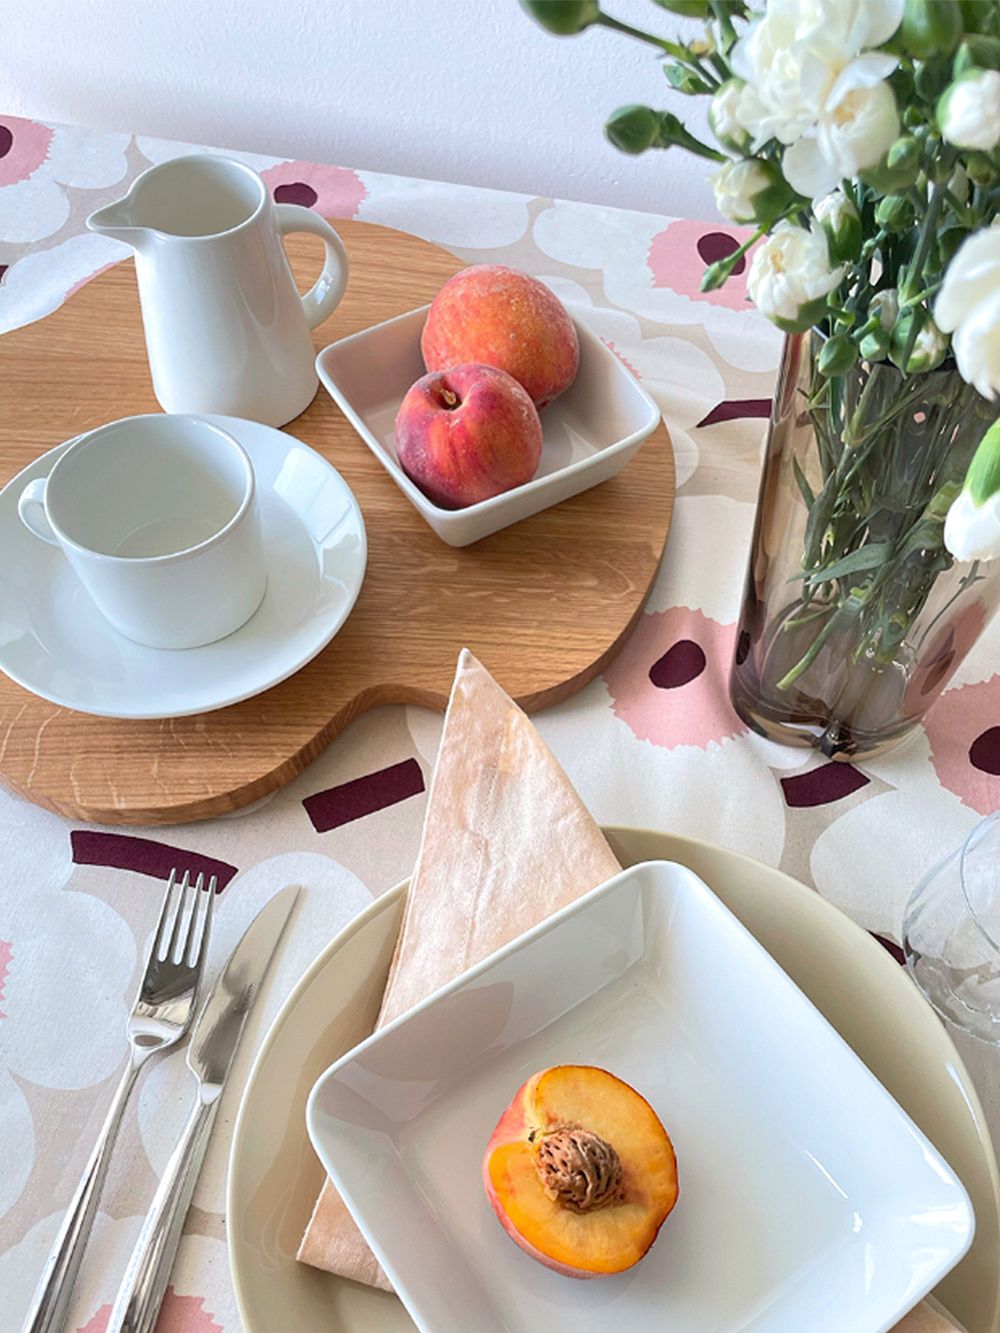 An image featuring Teema tableware, Carelia cutlery and Marimekko's Pieni Unikko fabric as a tablecloth in a table setting, as part of the dining area decor.